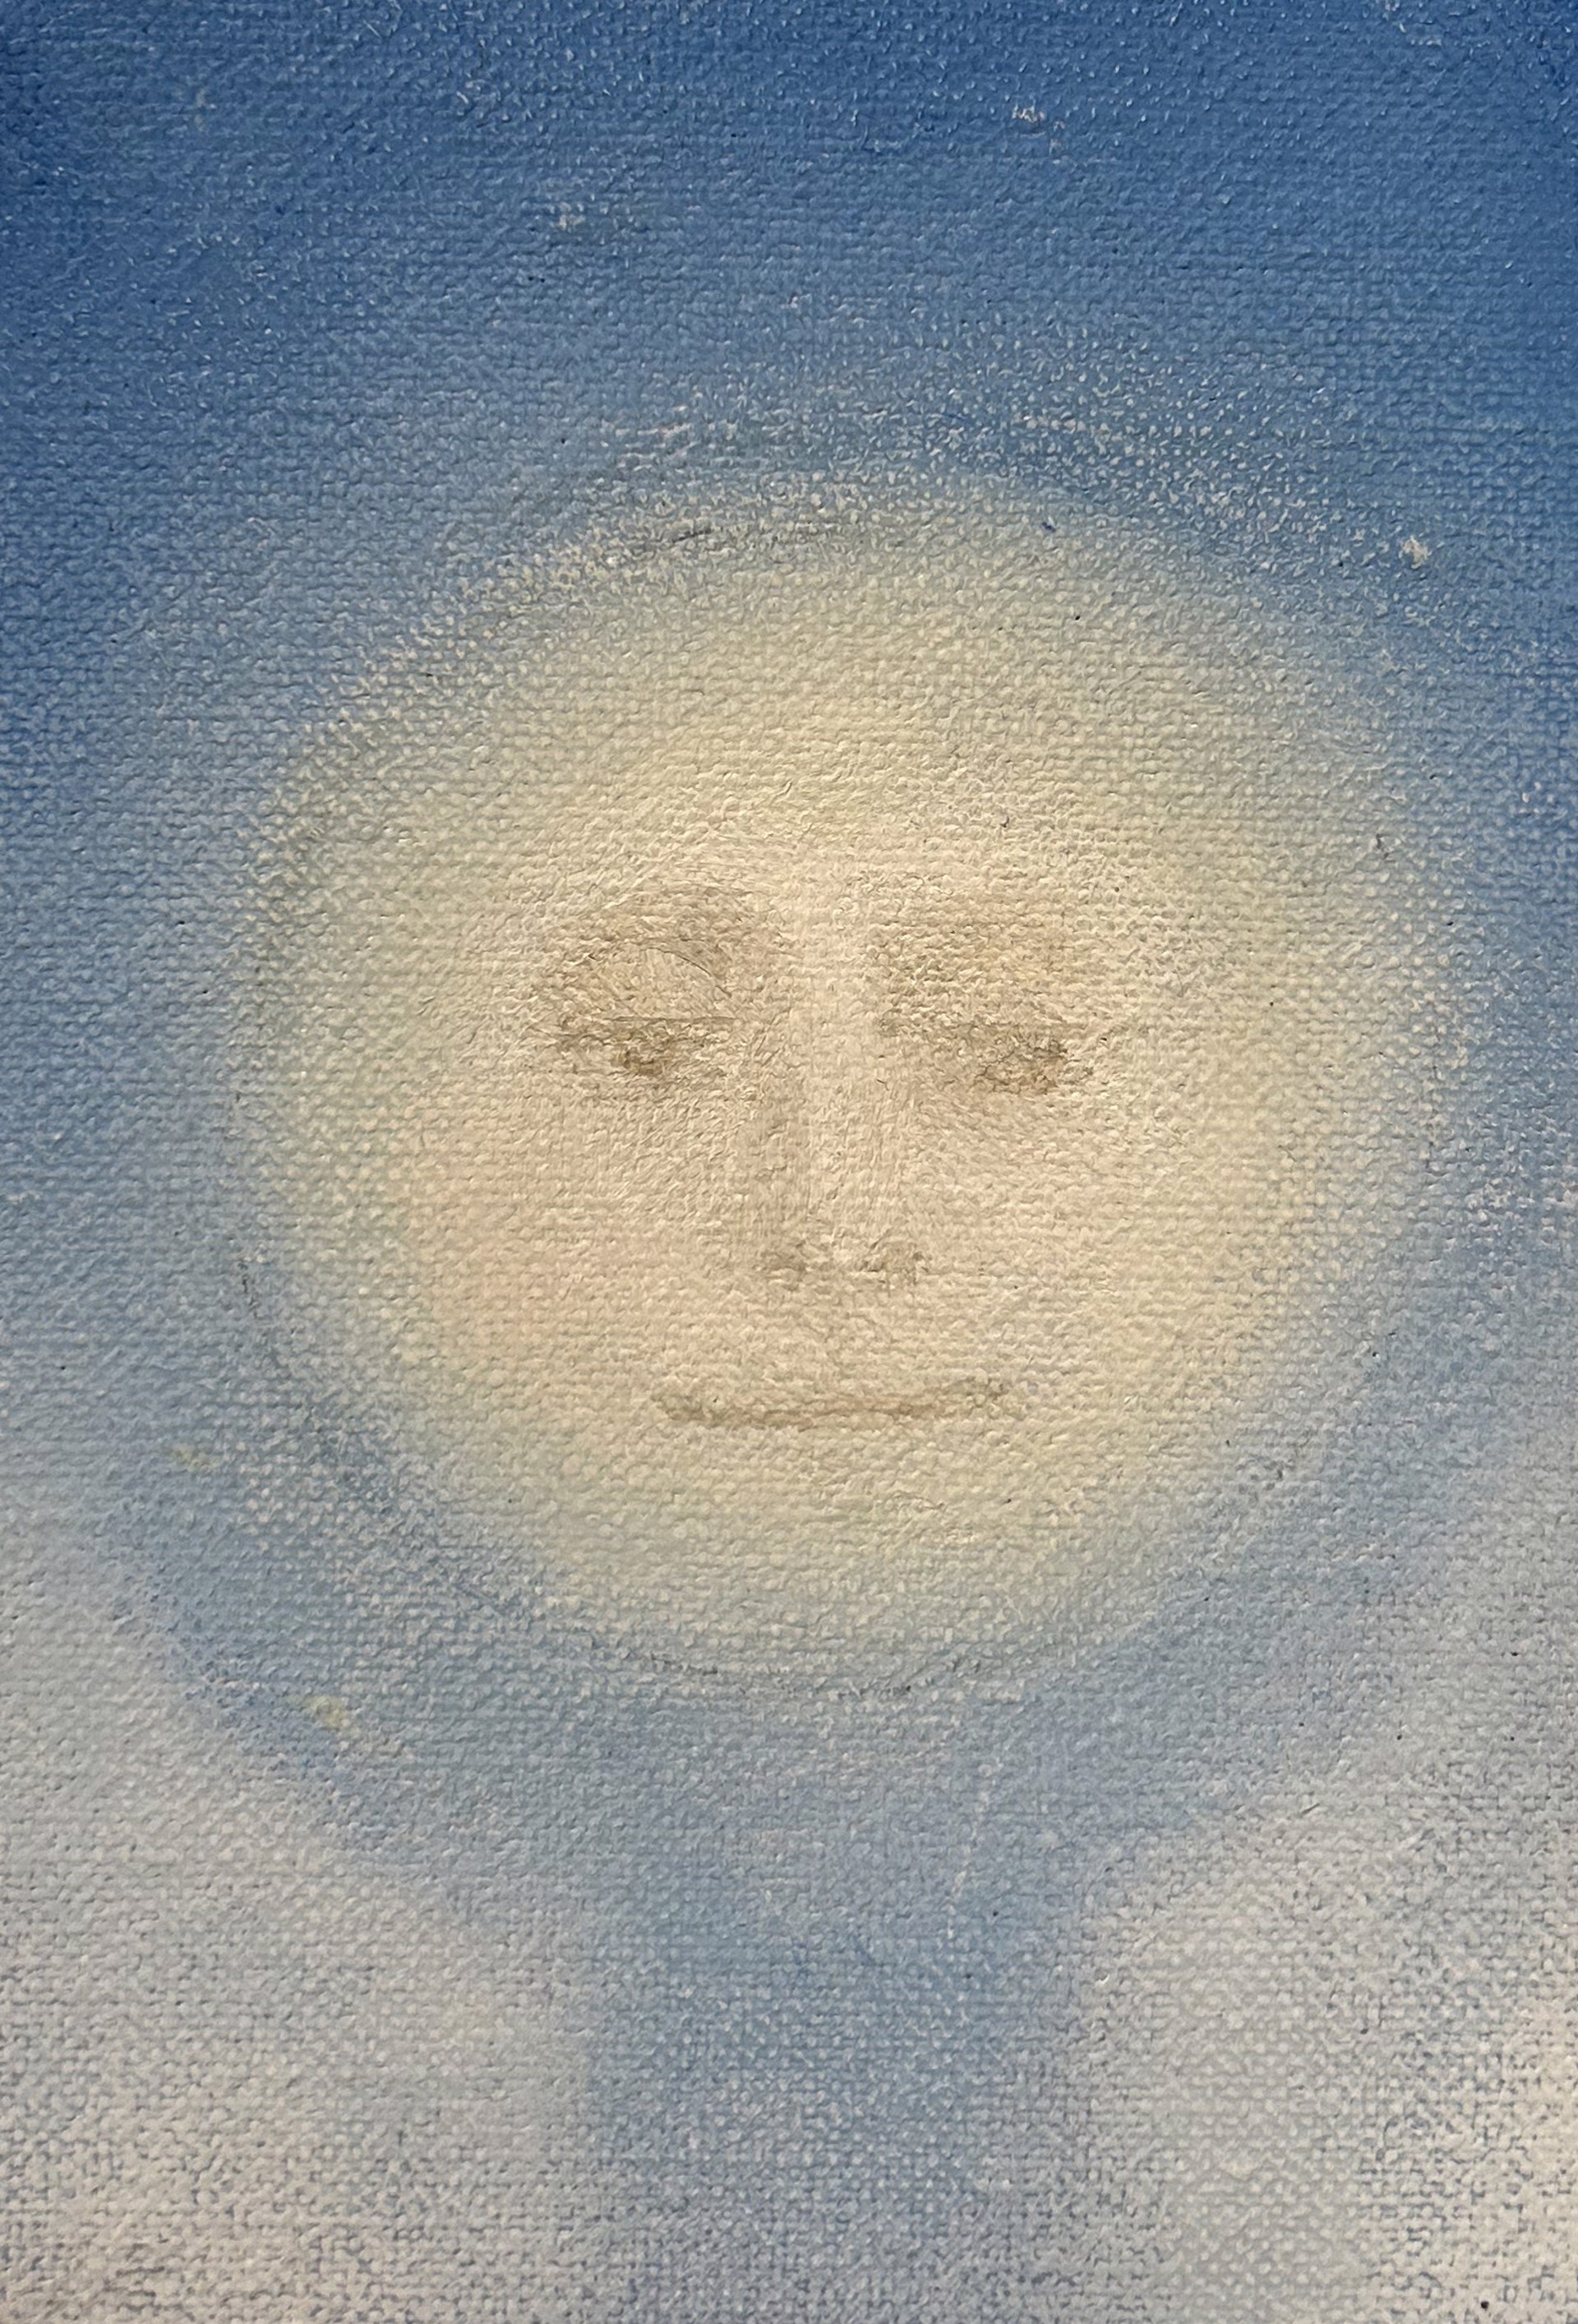 Moonface - white on blue by Leila McConnell